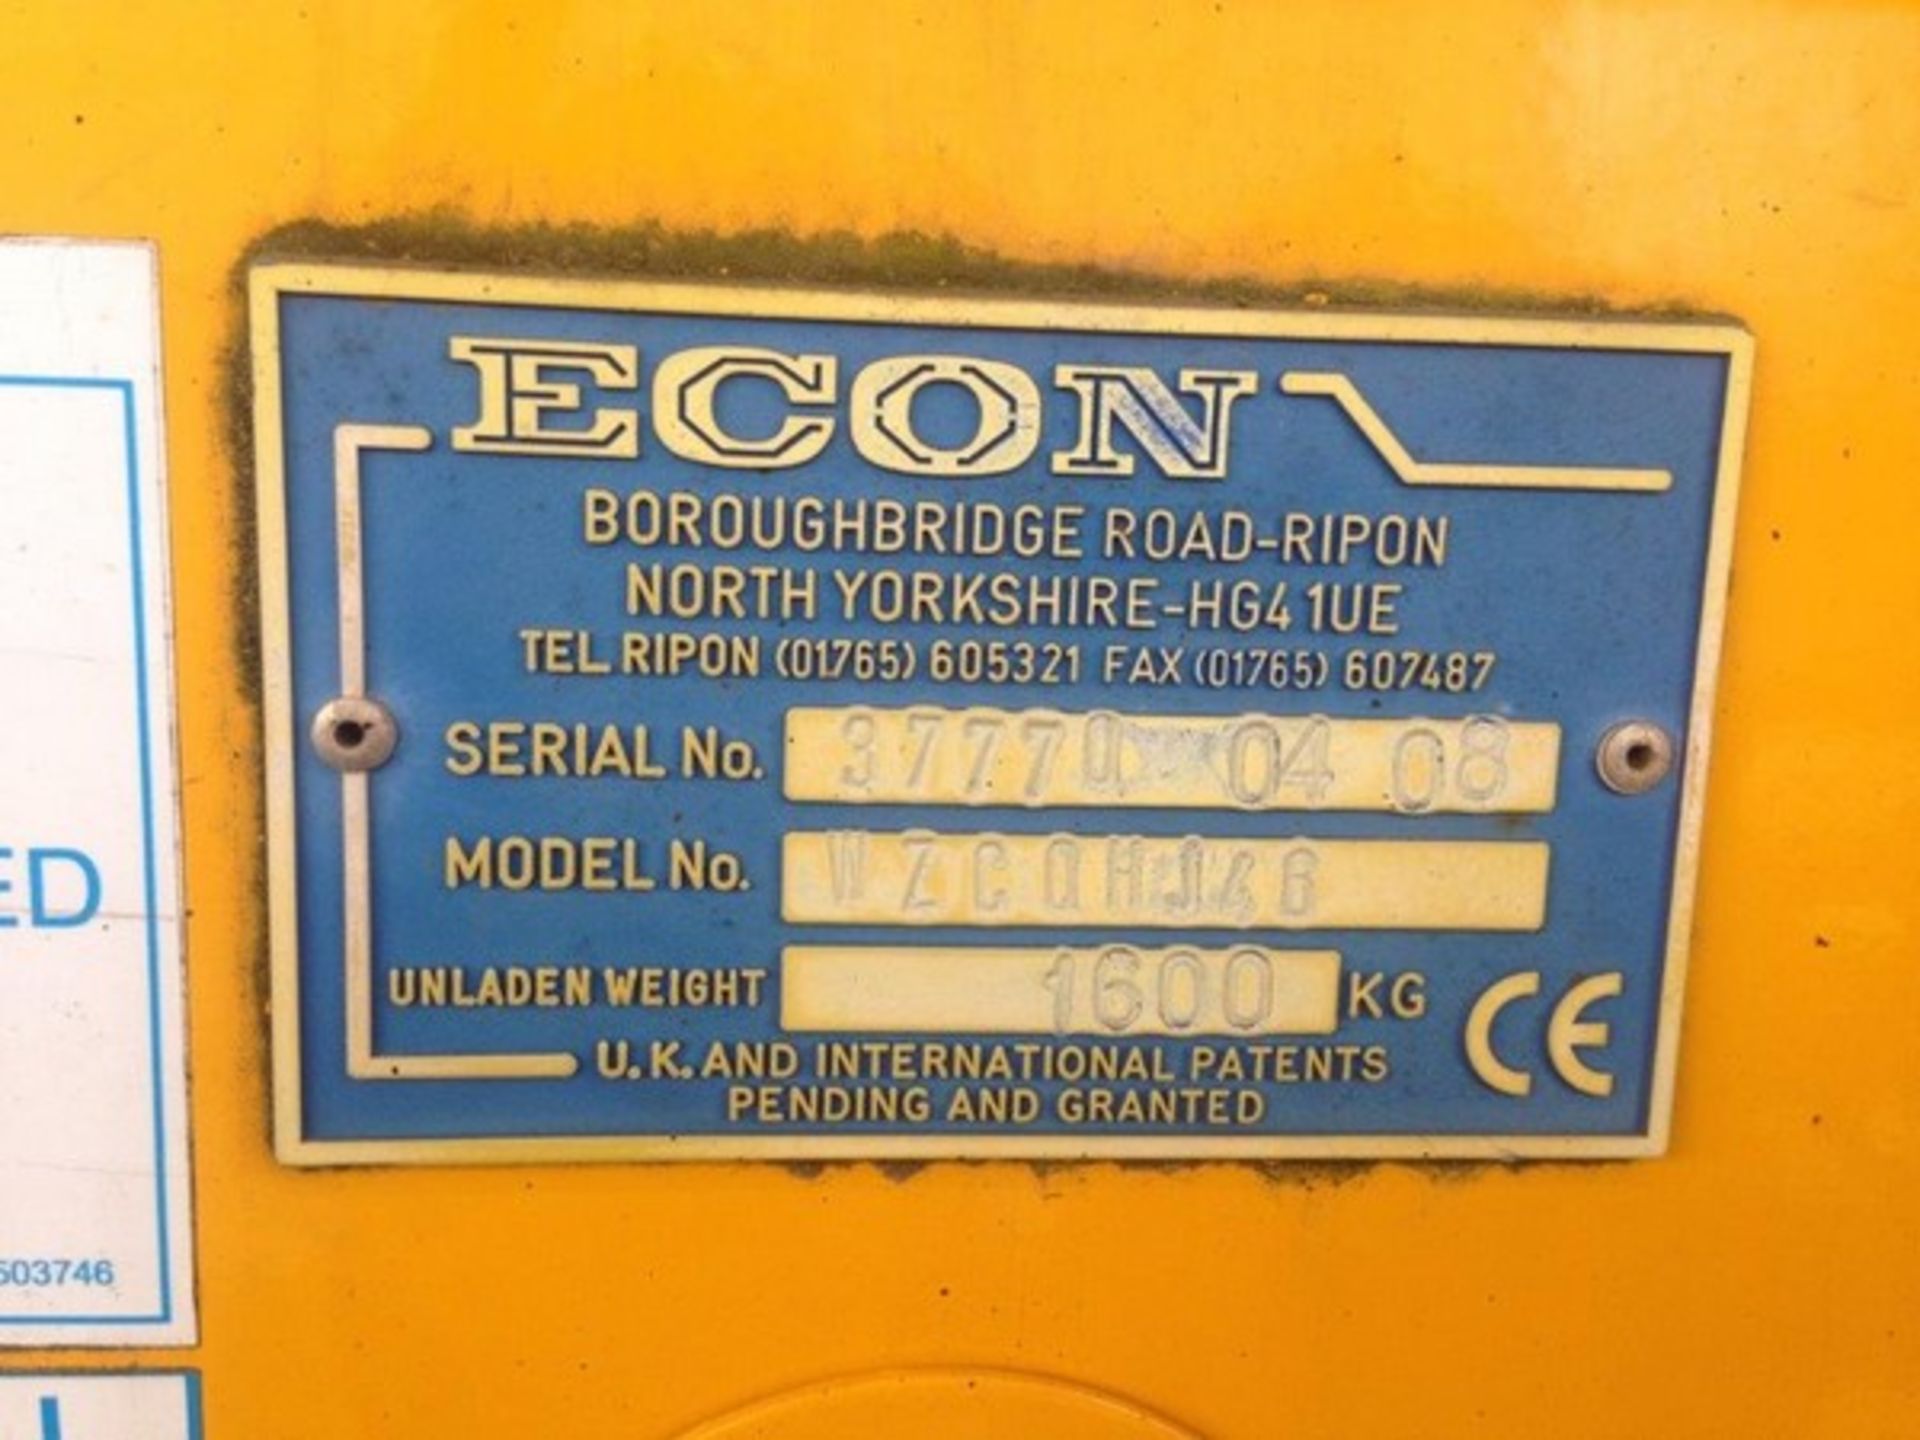 2004 ECON WZCQHJ46 body gritter s/n 37770 Reg No SN58 CVH (861) **To be sold from Errol auction s - Image 12 of 12